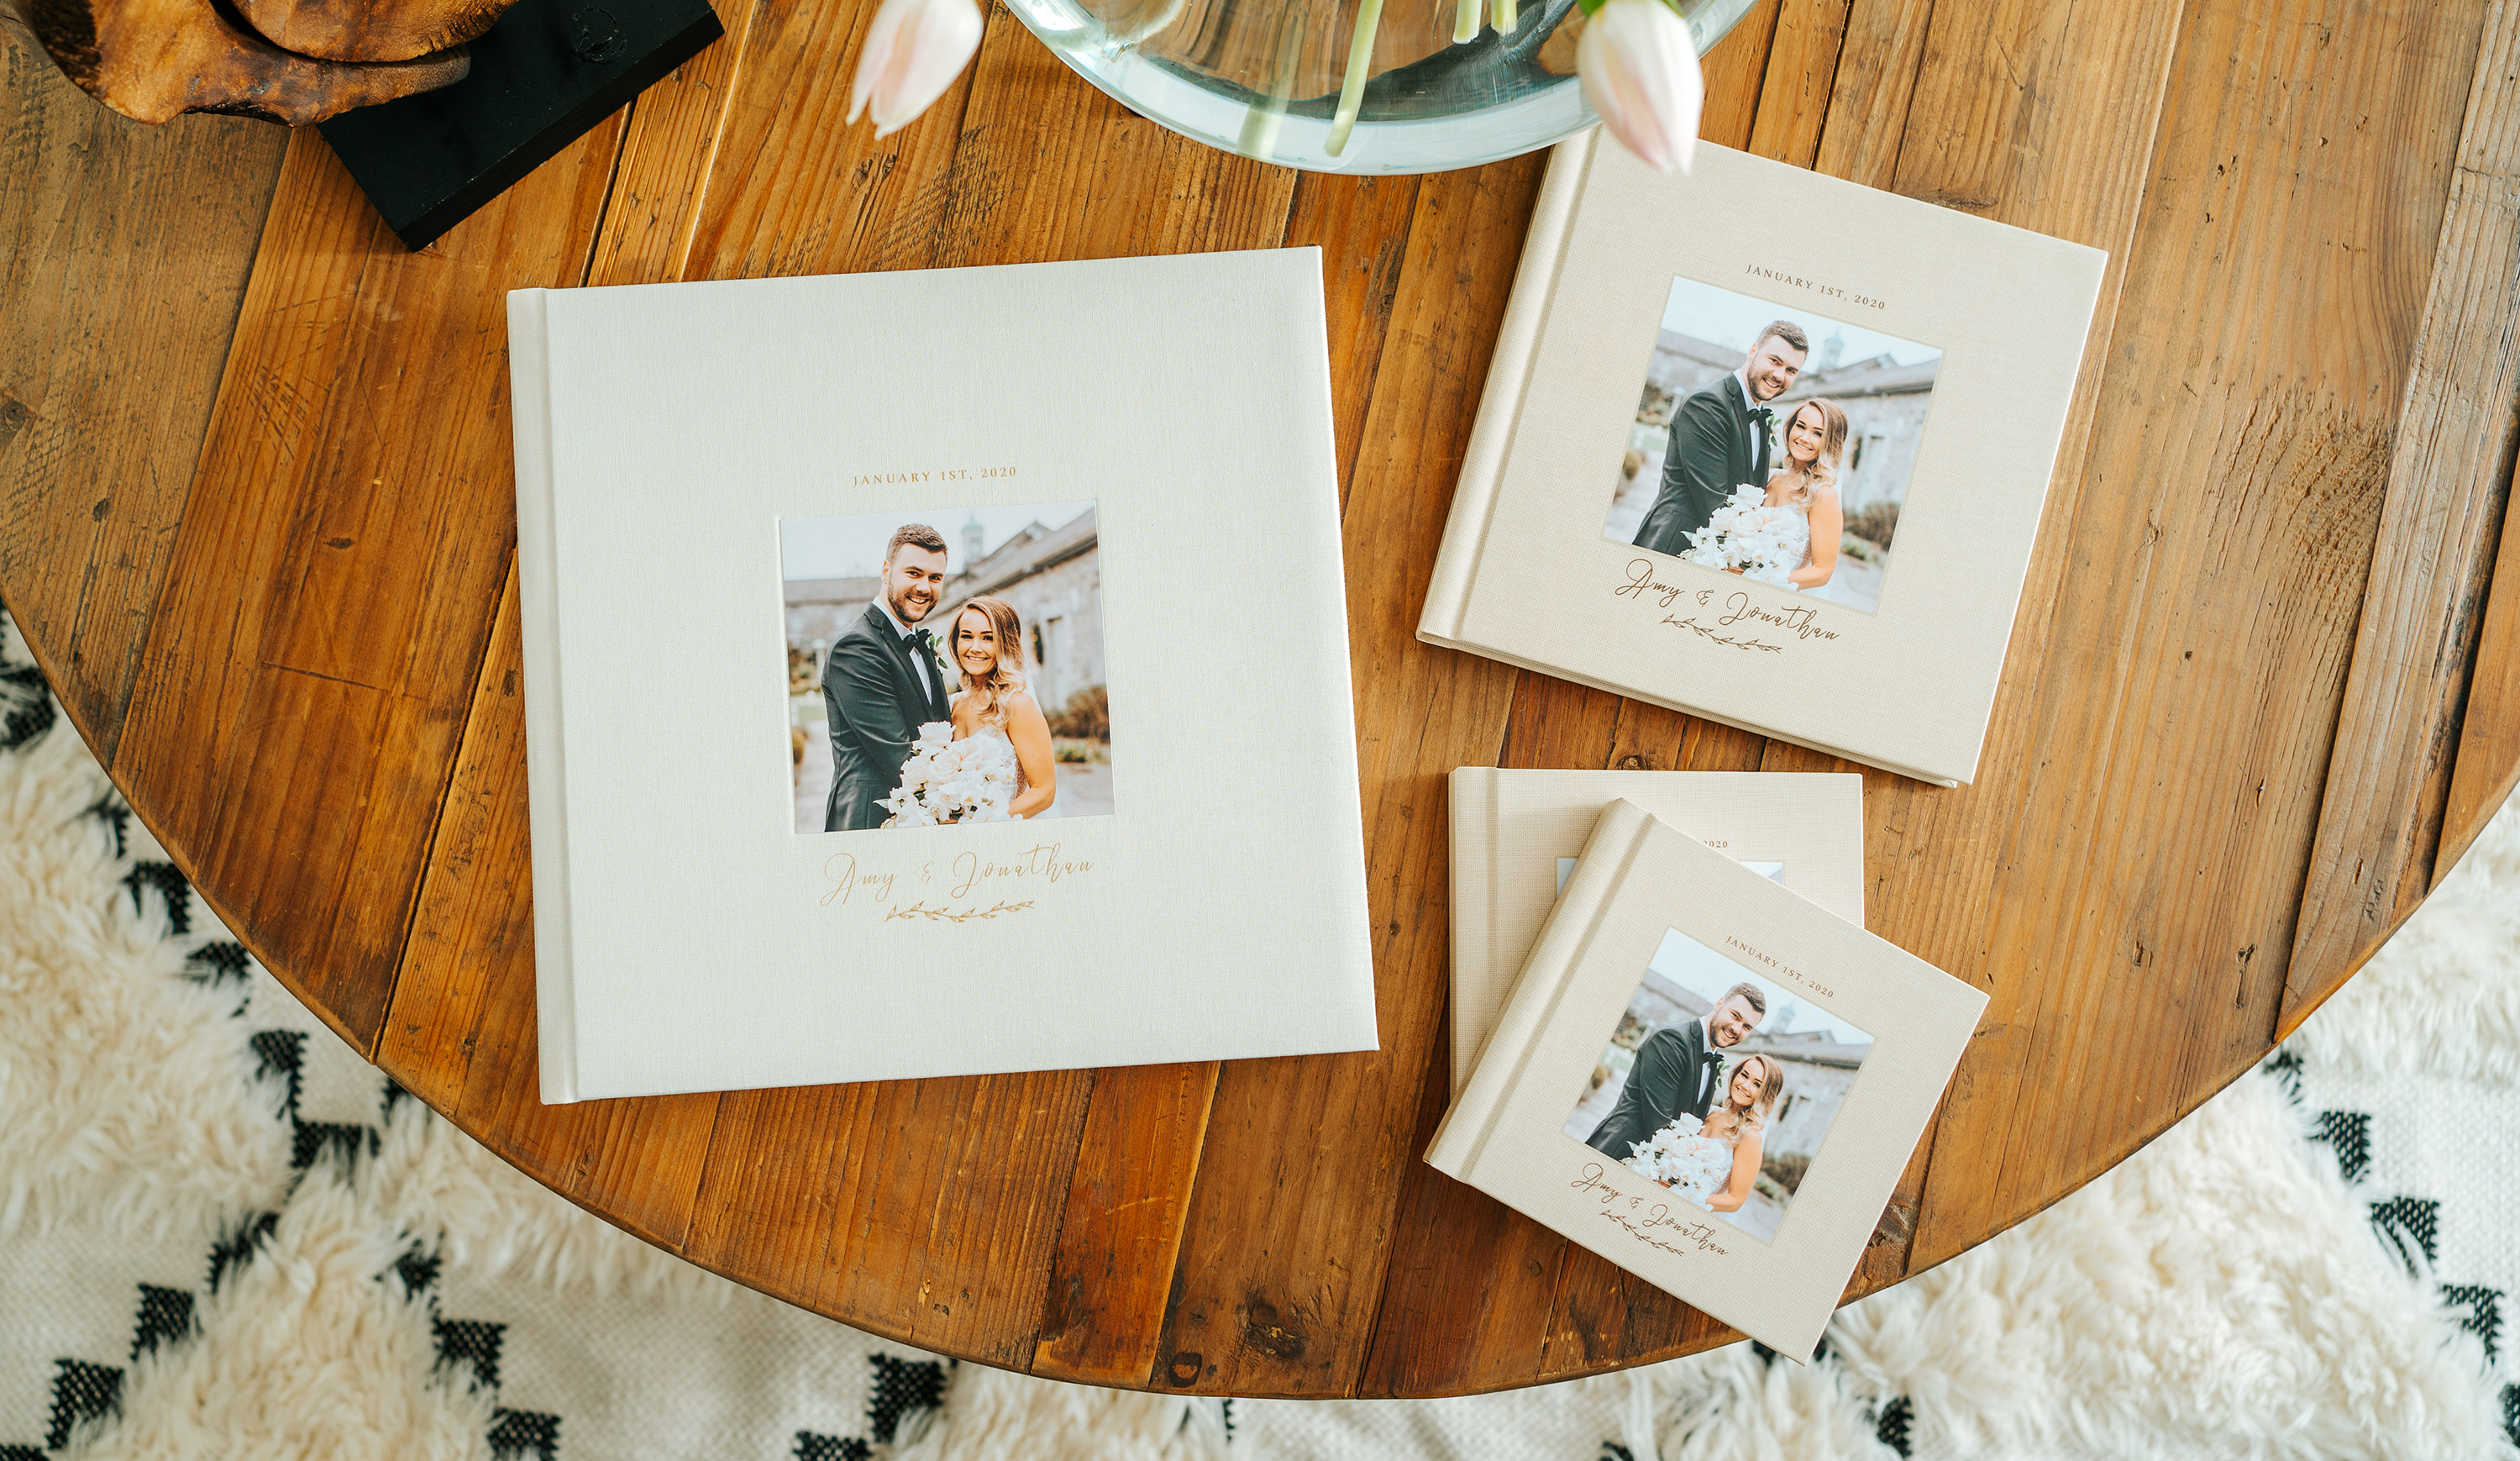 Parent wedding album copies laying on wooden table